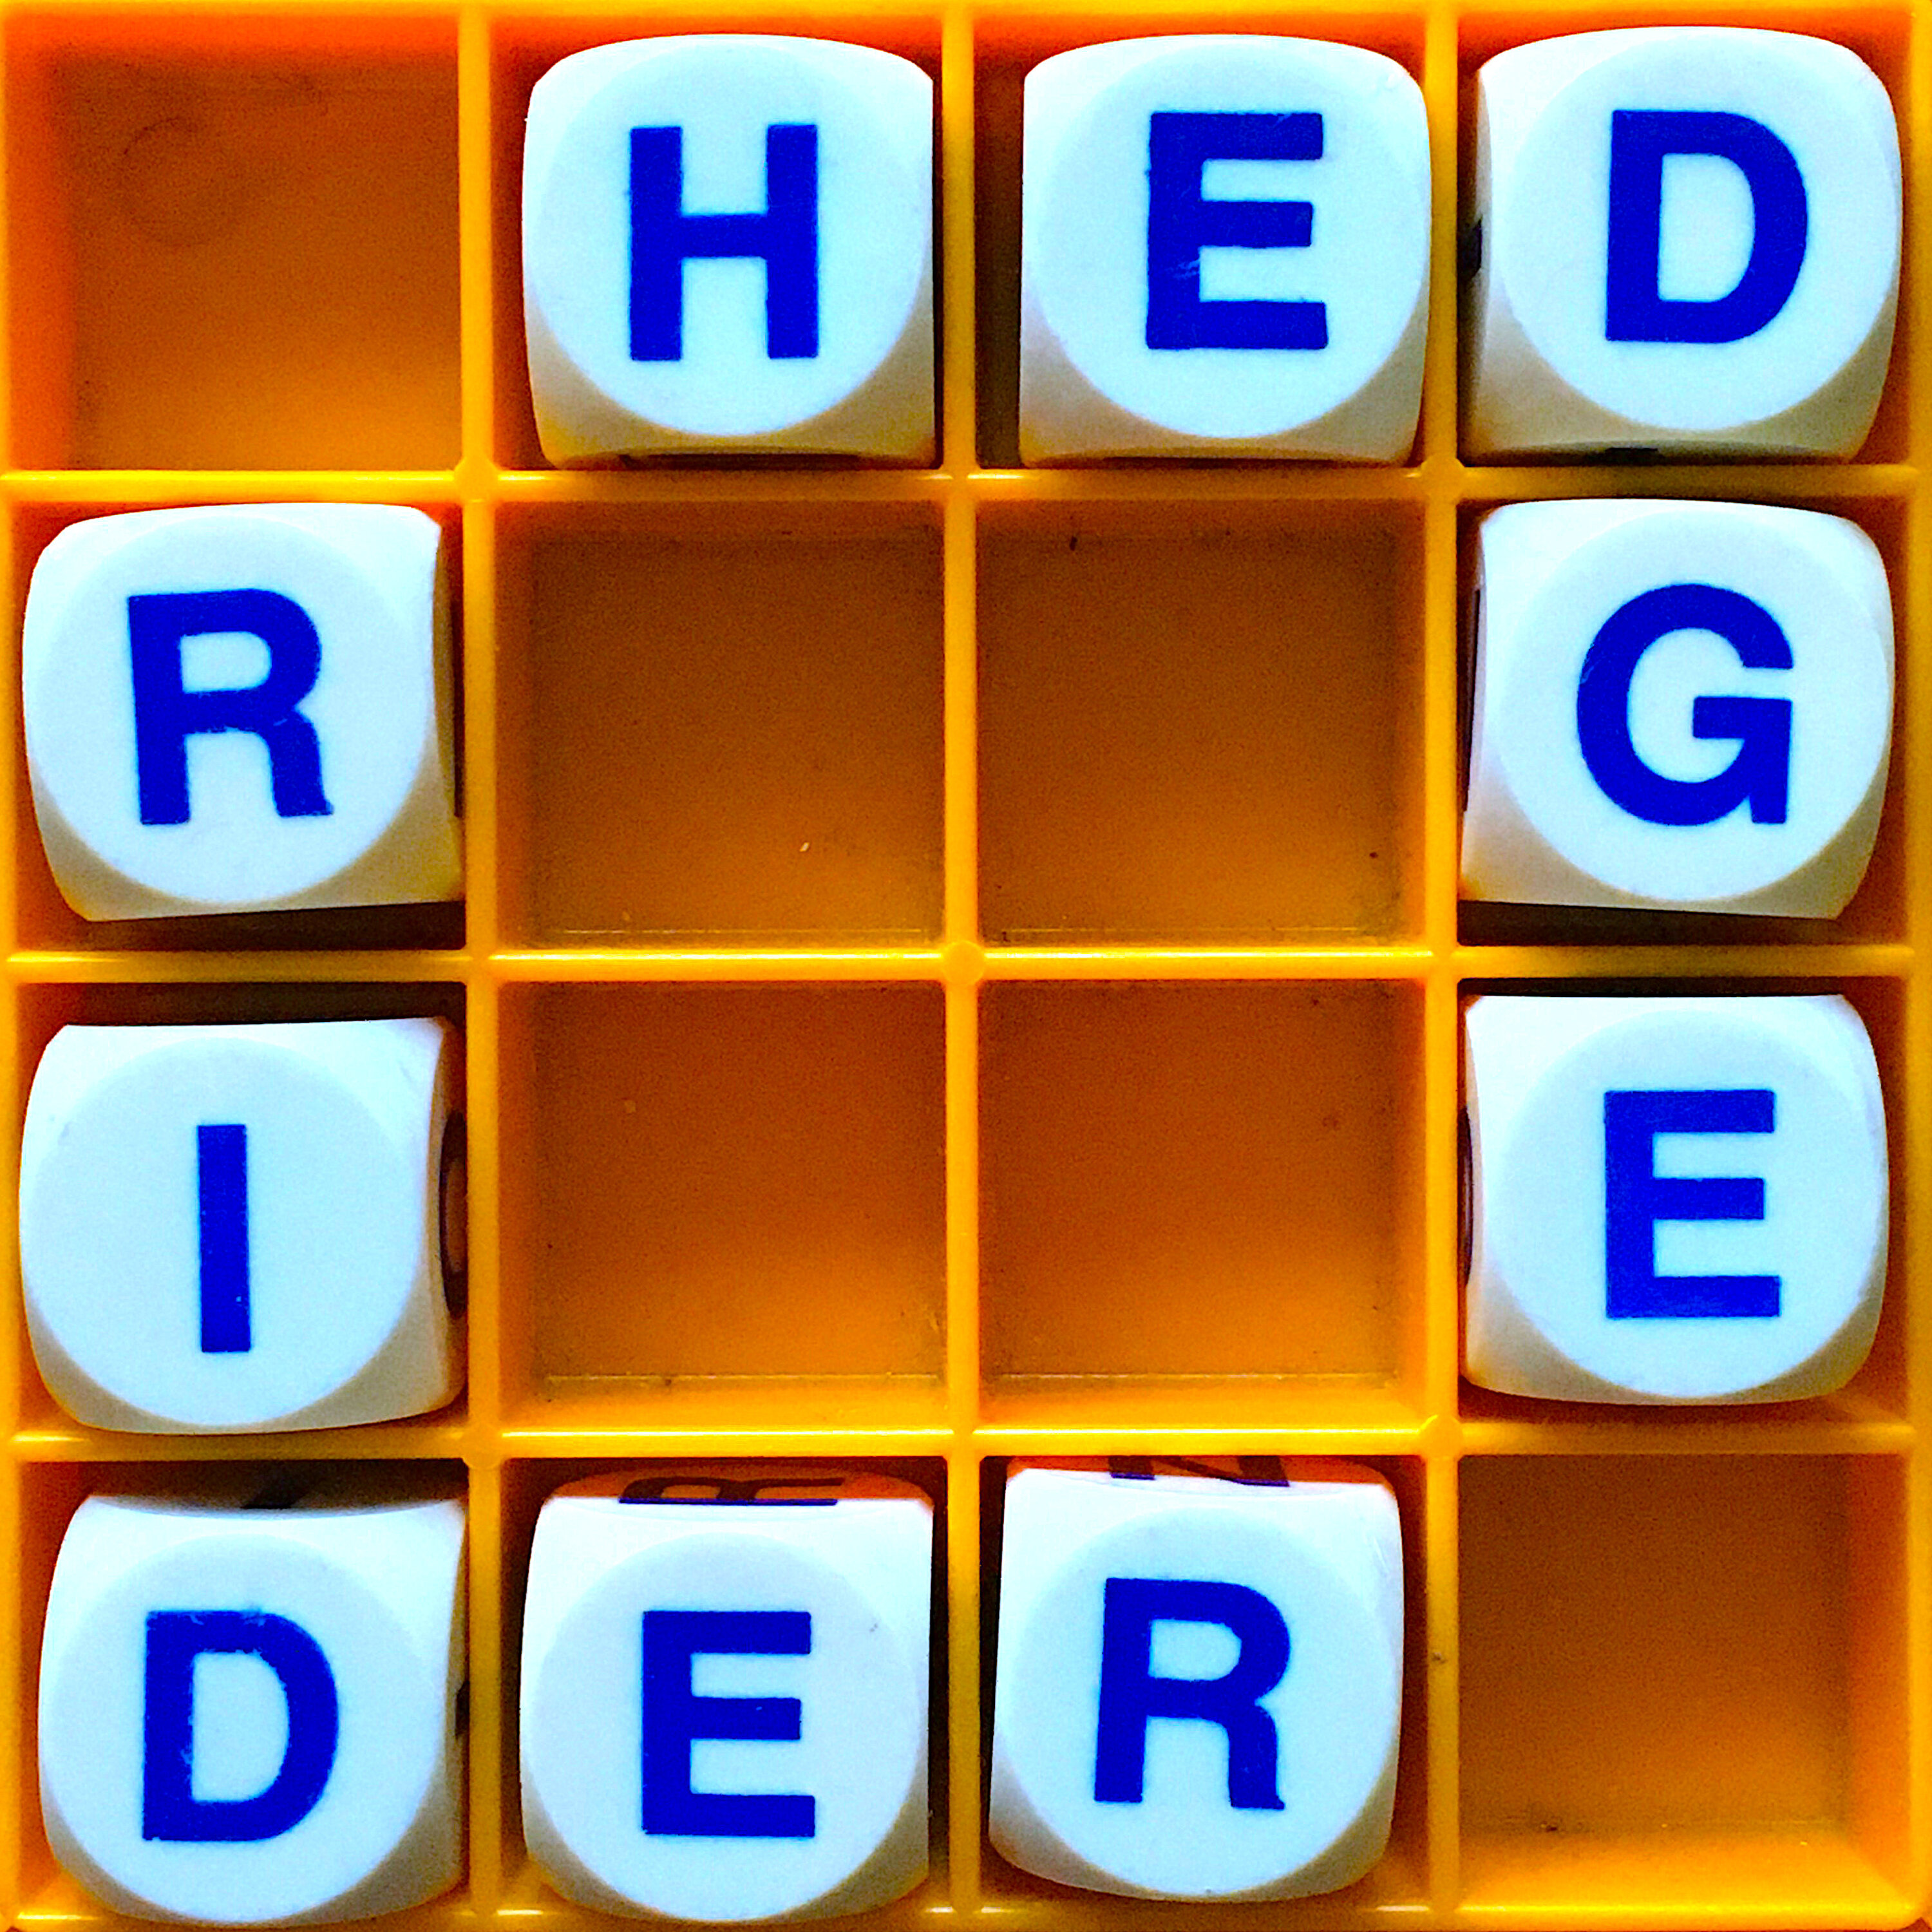 Thumbnail for "143. Hedge Rider".